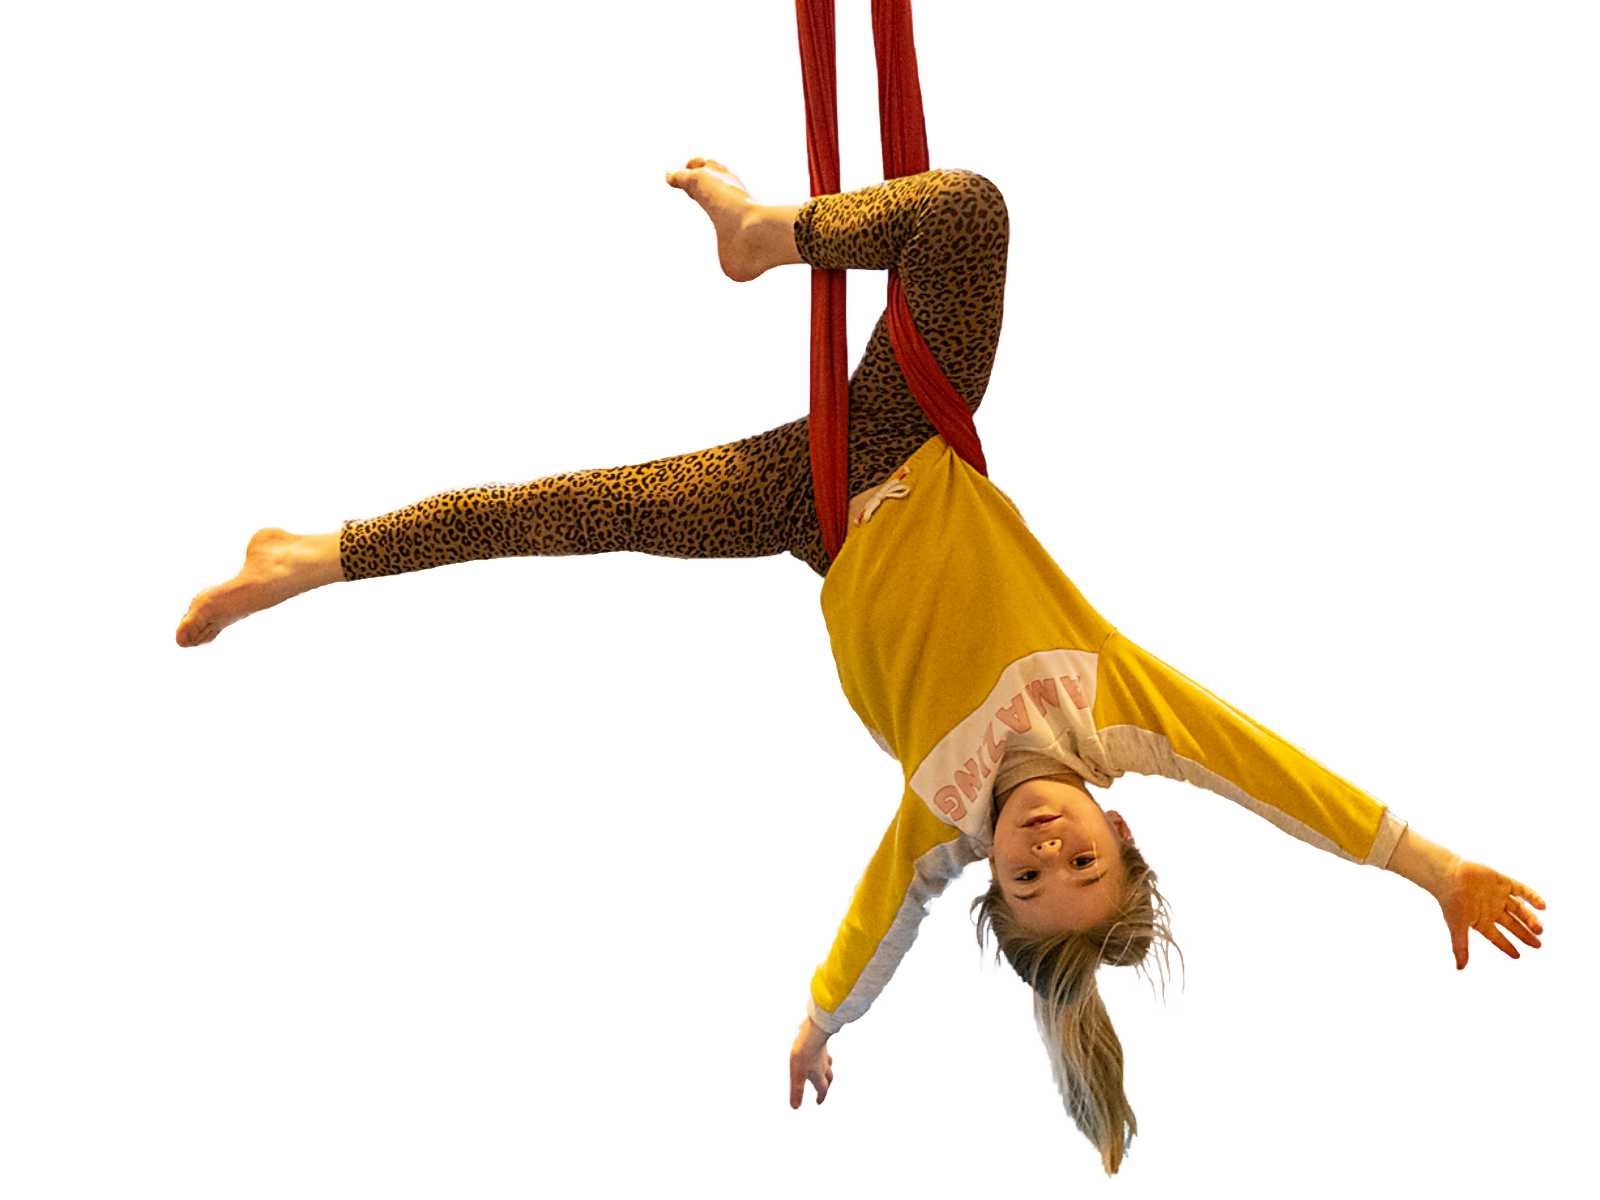 Girl hanging upside down supported by a strap